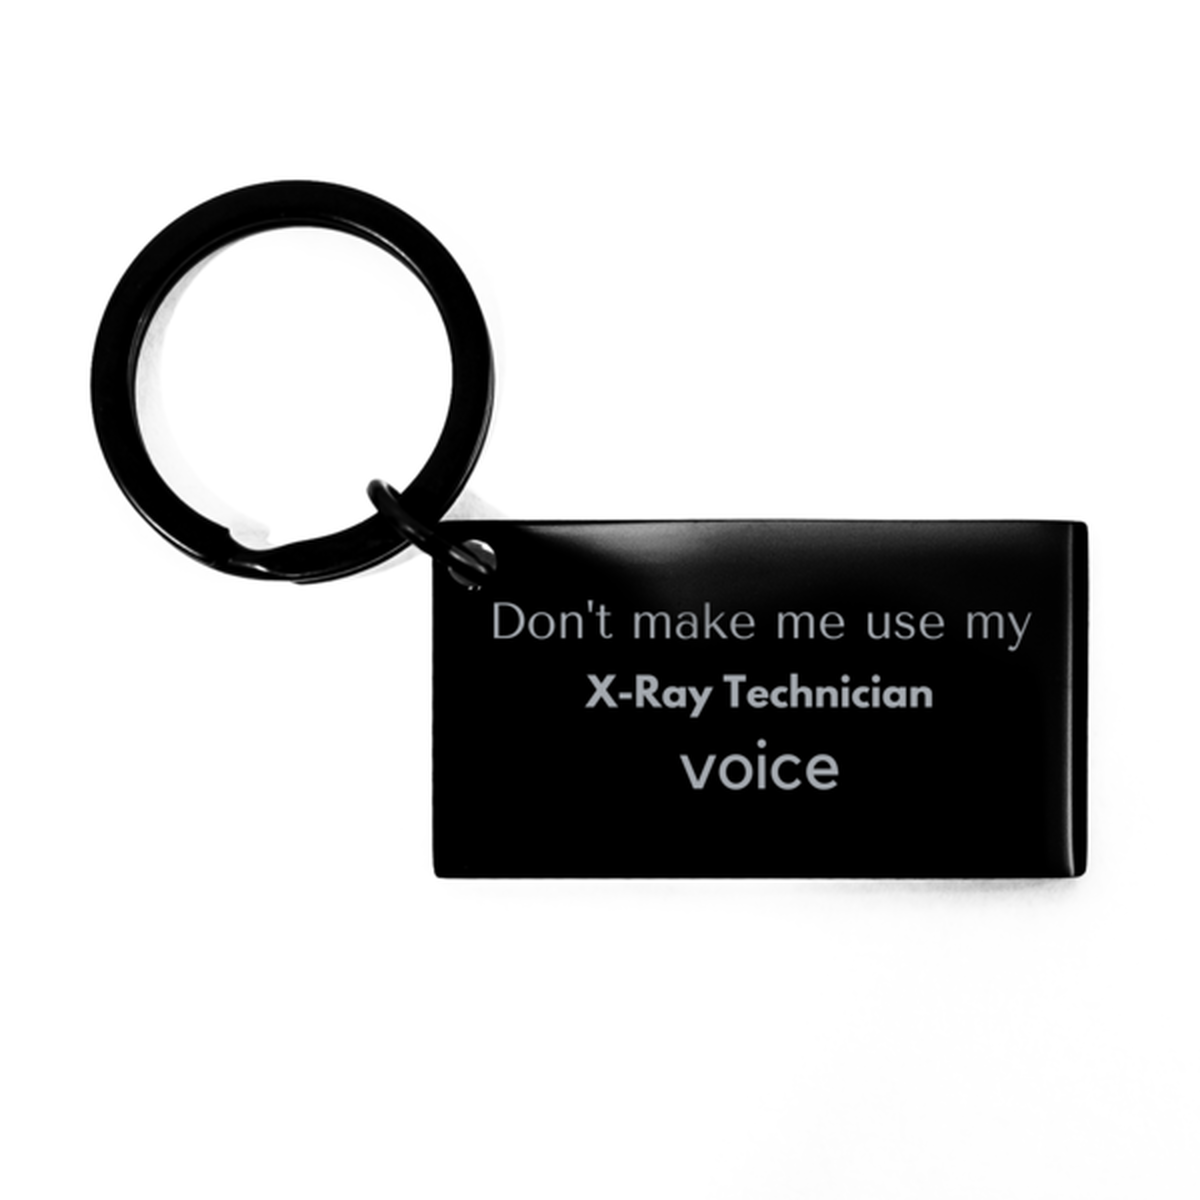 Don't make me use my X-Ray Technician voice, Sarcasm X-Ray Technician Gifts, Christmas X-Ray Technician Keychain Birthday Unique Gifts For X-Ray Technician Coworkers, Men, Women, Colleague, Friends